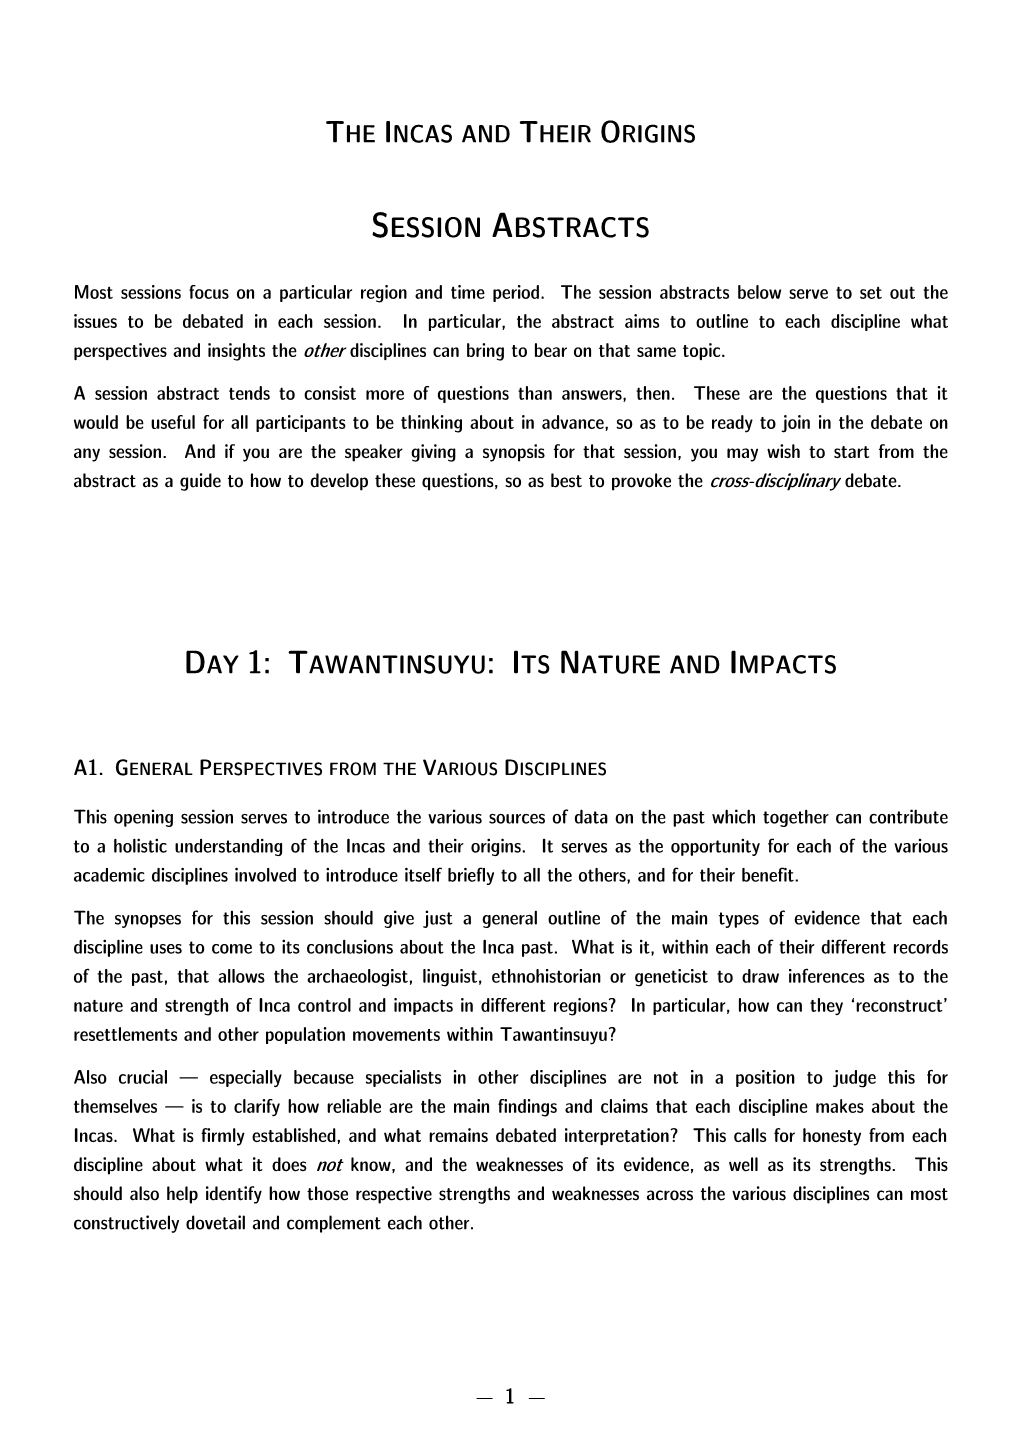 Session Abstracts